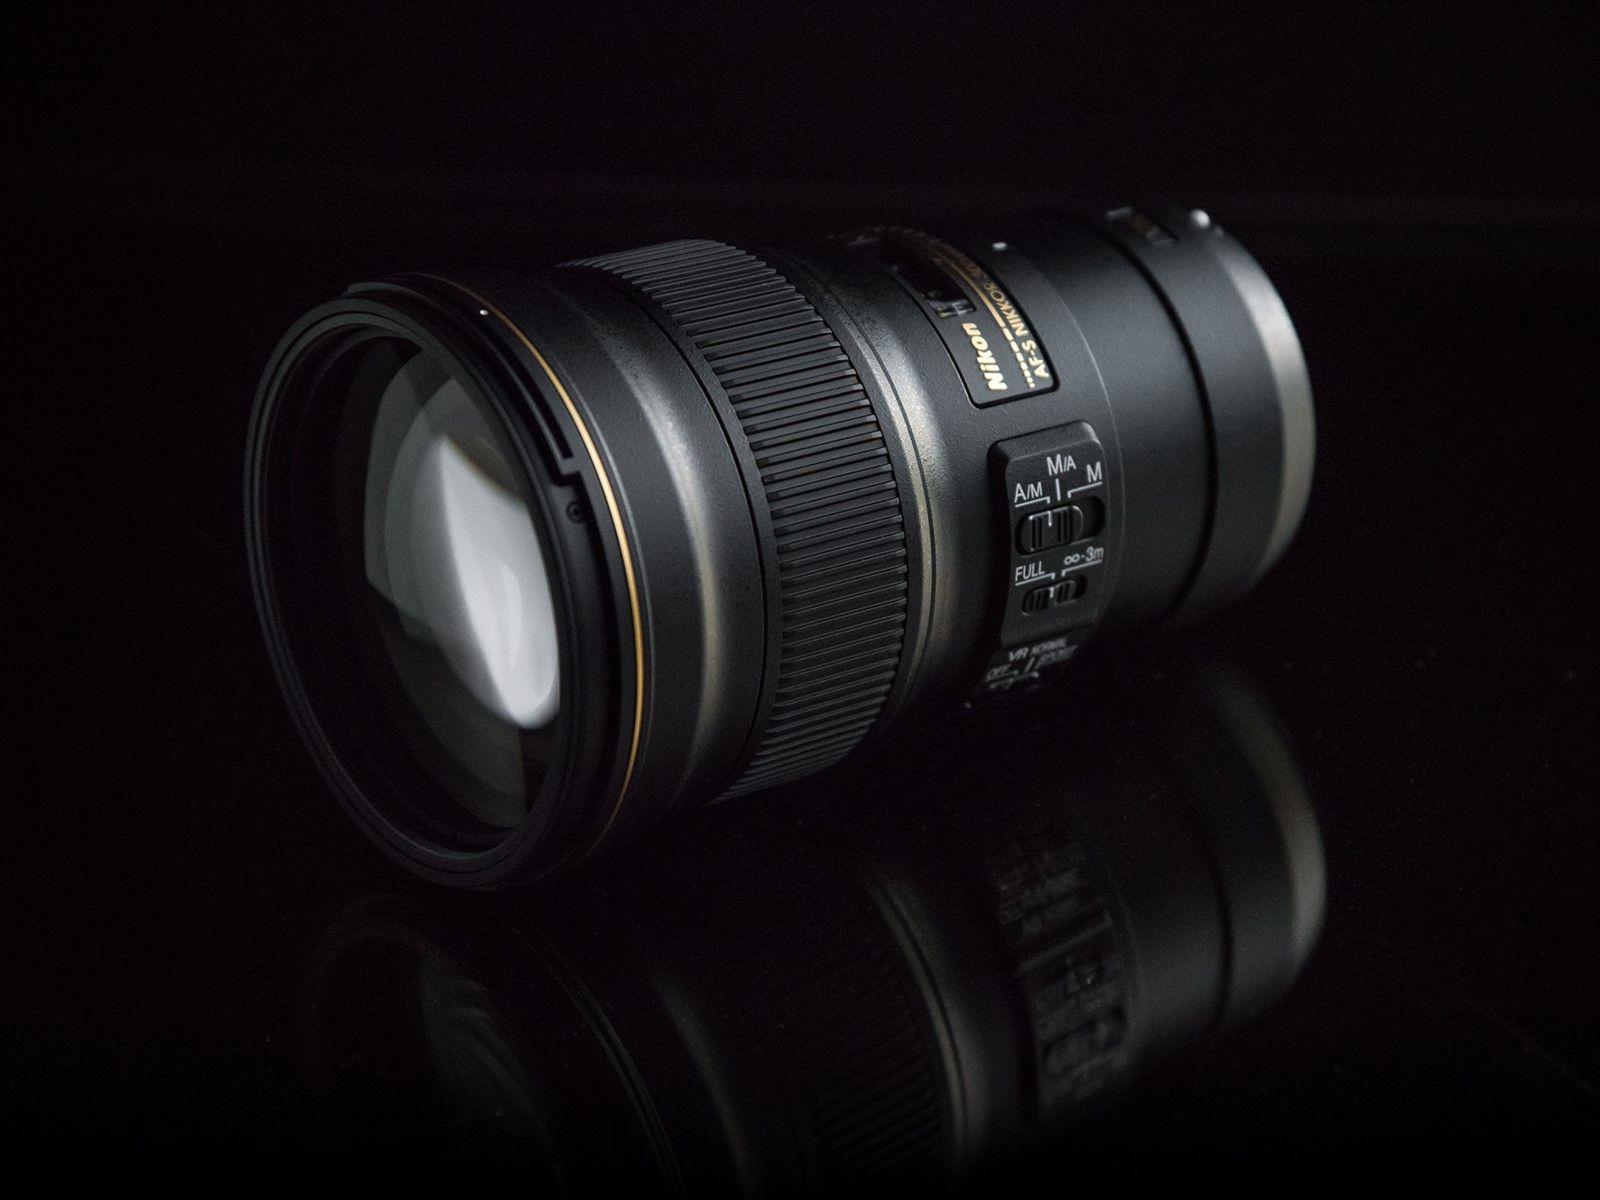 UPDATED Nikon announces new firmware for 300mm F4 VR to fix blur at